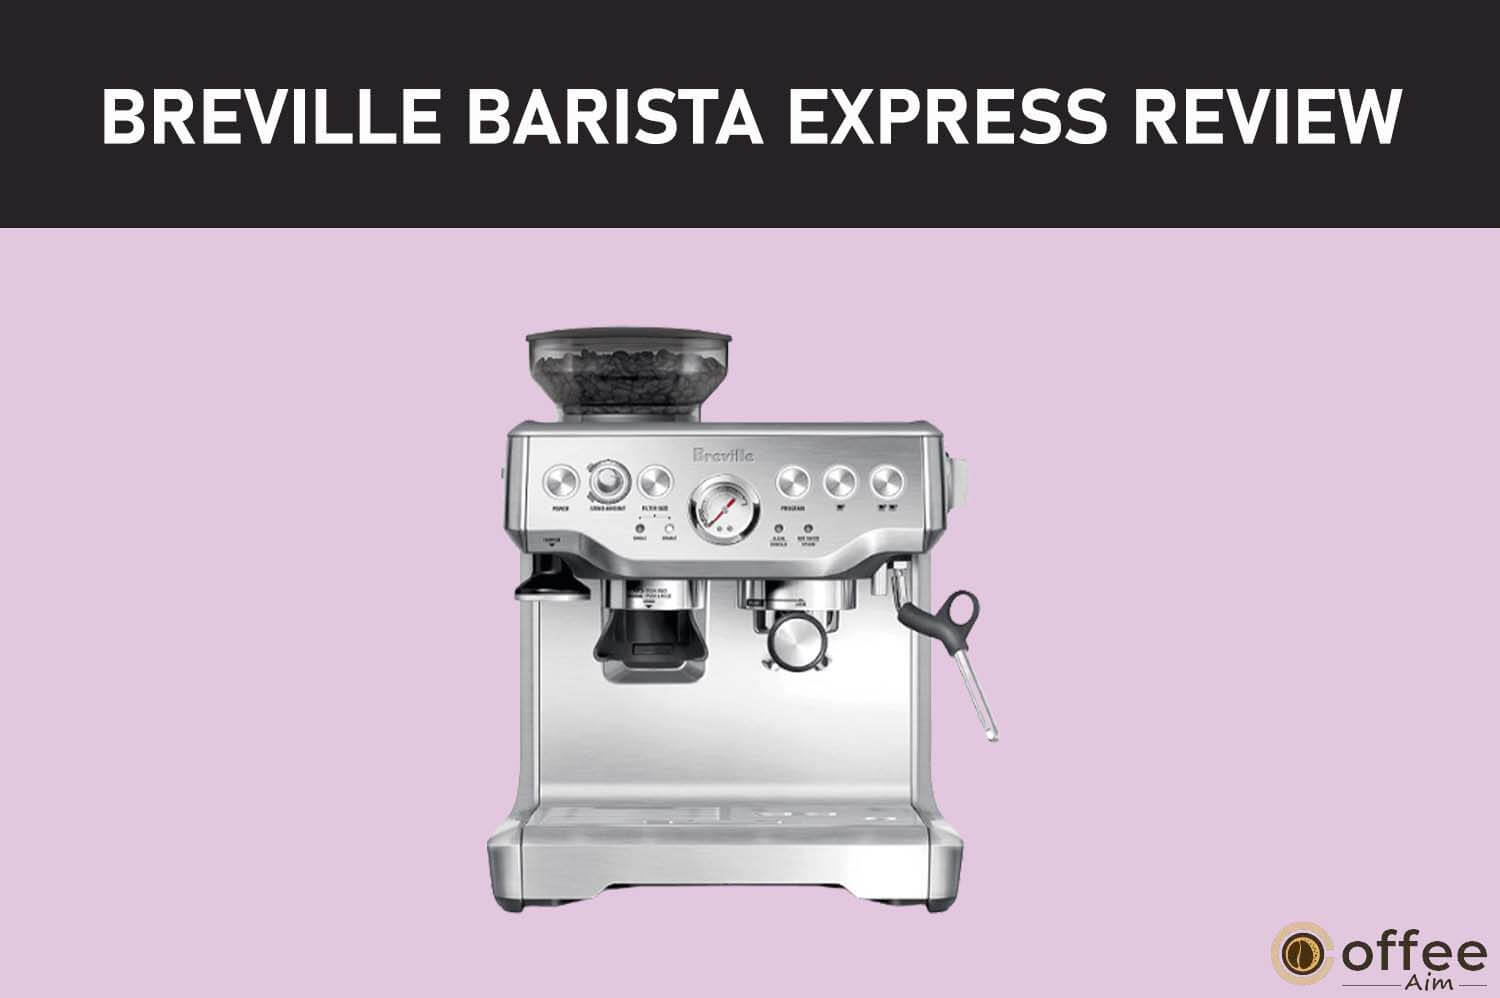 Featured image for the article "Breville Barista Express Review"